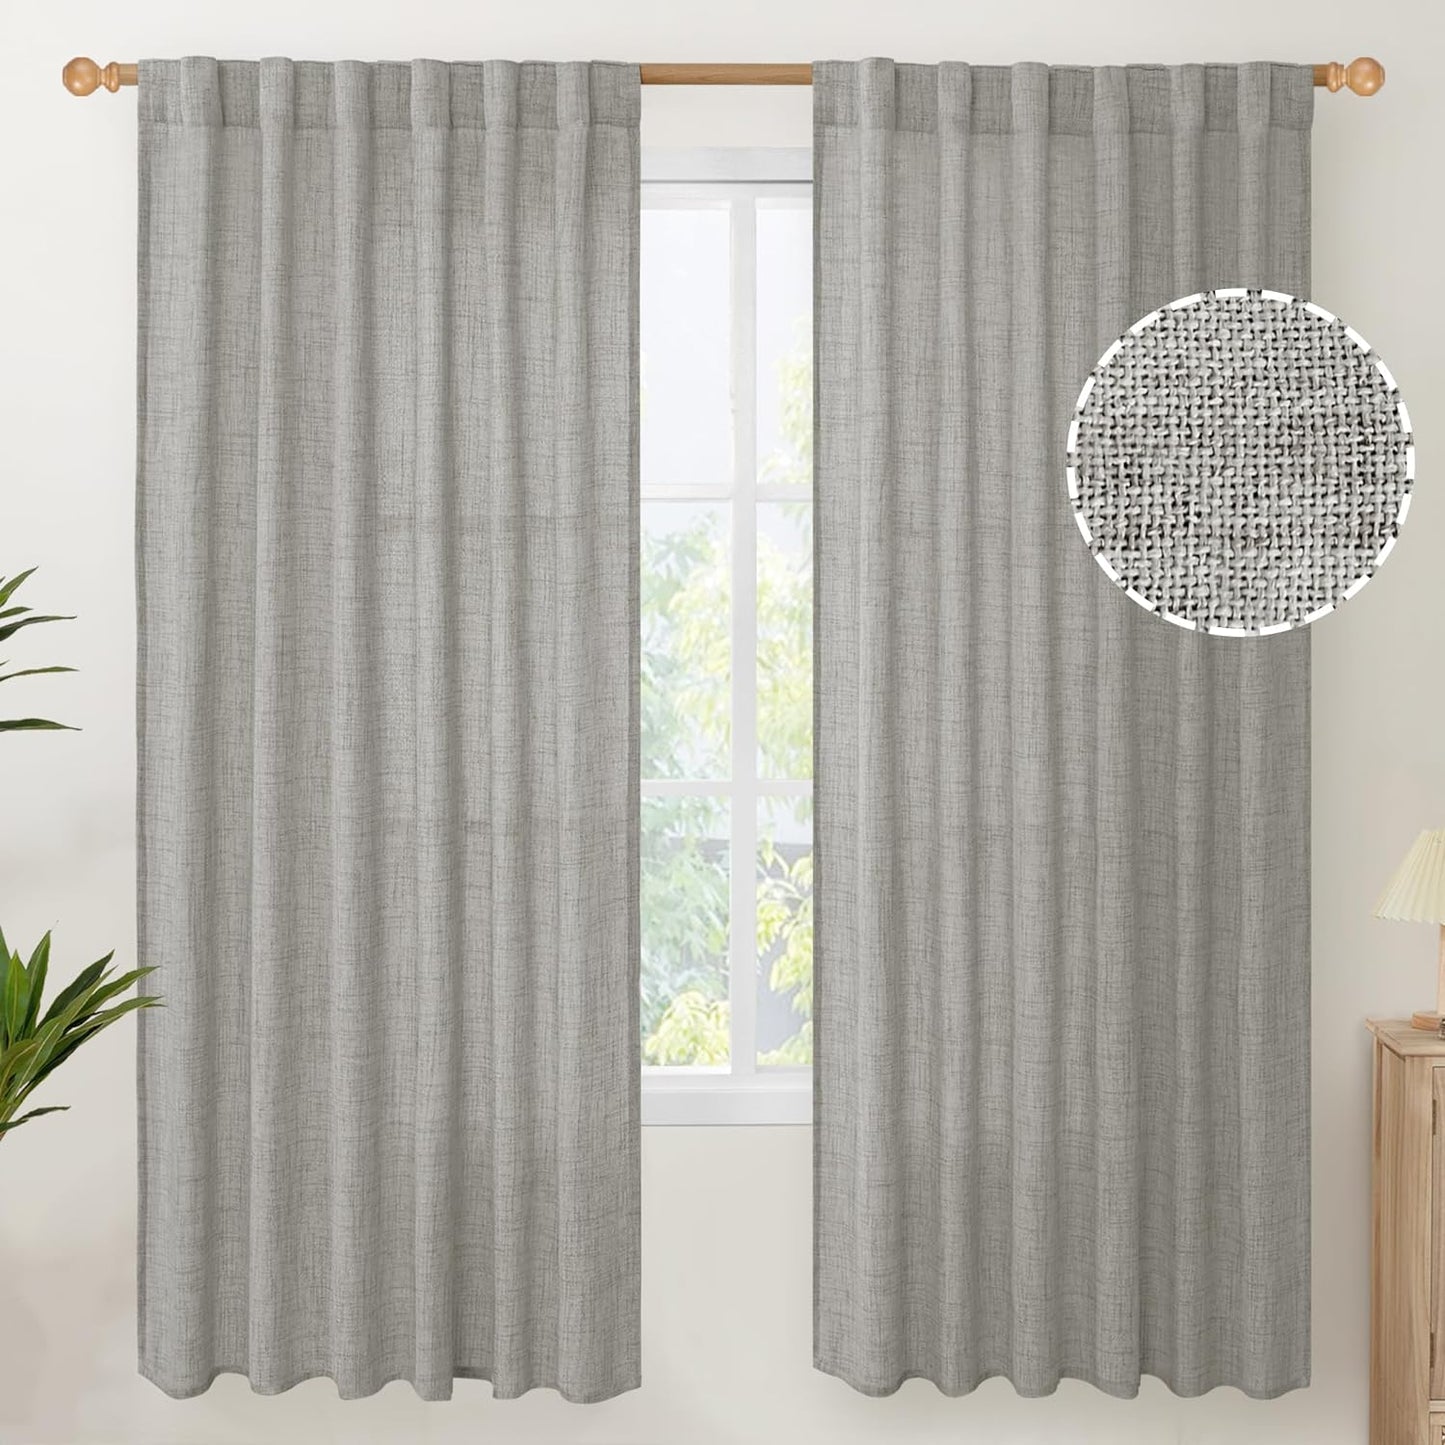 Youngstex Natural Linen Curtains 72 Inch Length 2 Panels for Living Room Light Filtering Textured Window Drapes for Bedroom Dining Office Back Tab Rod Pocket, 52 X 72 Inch  YoungsTex Dark Grey 52W X 72L 